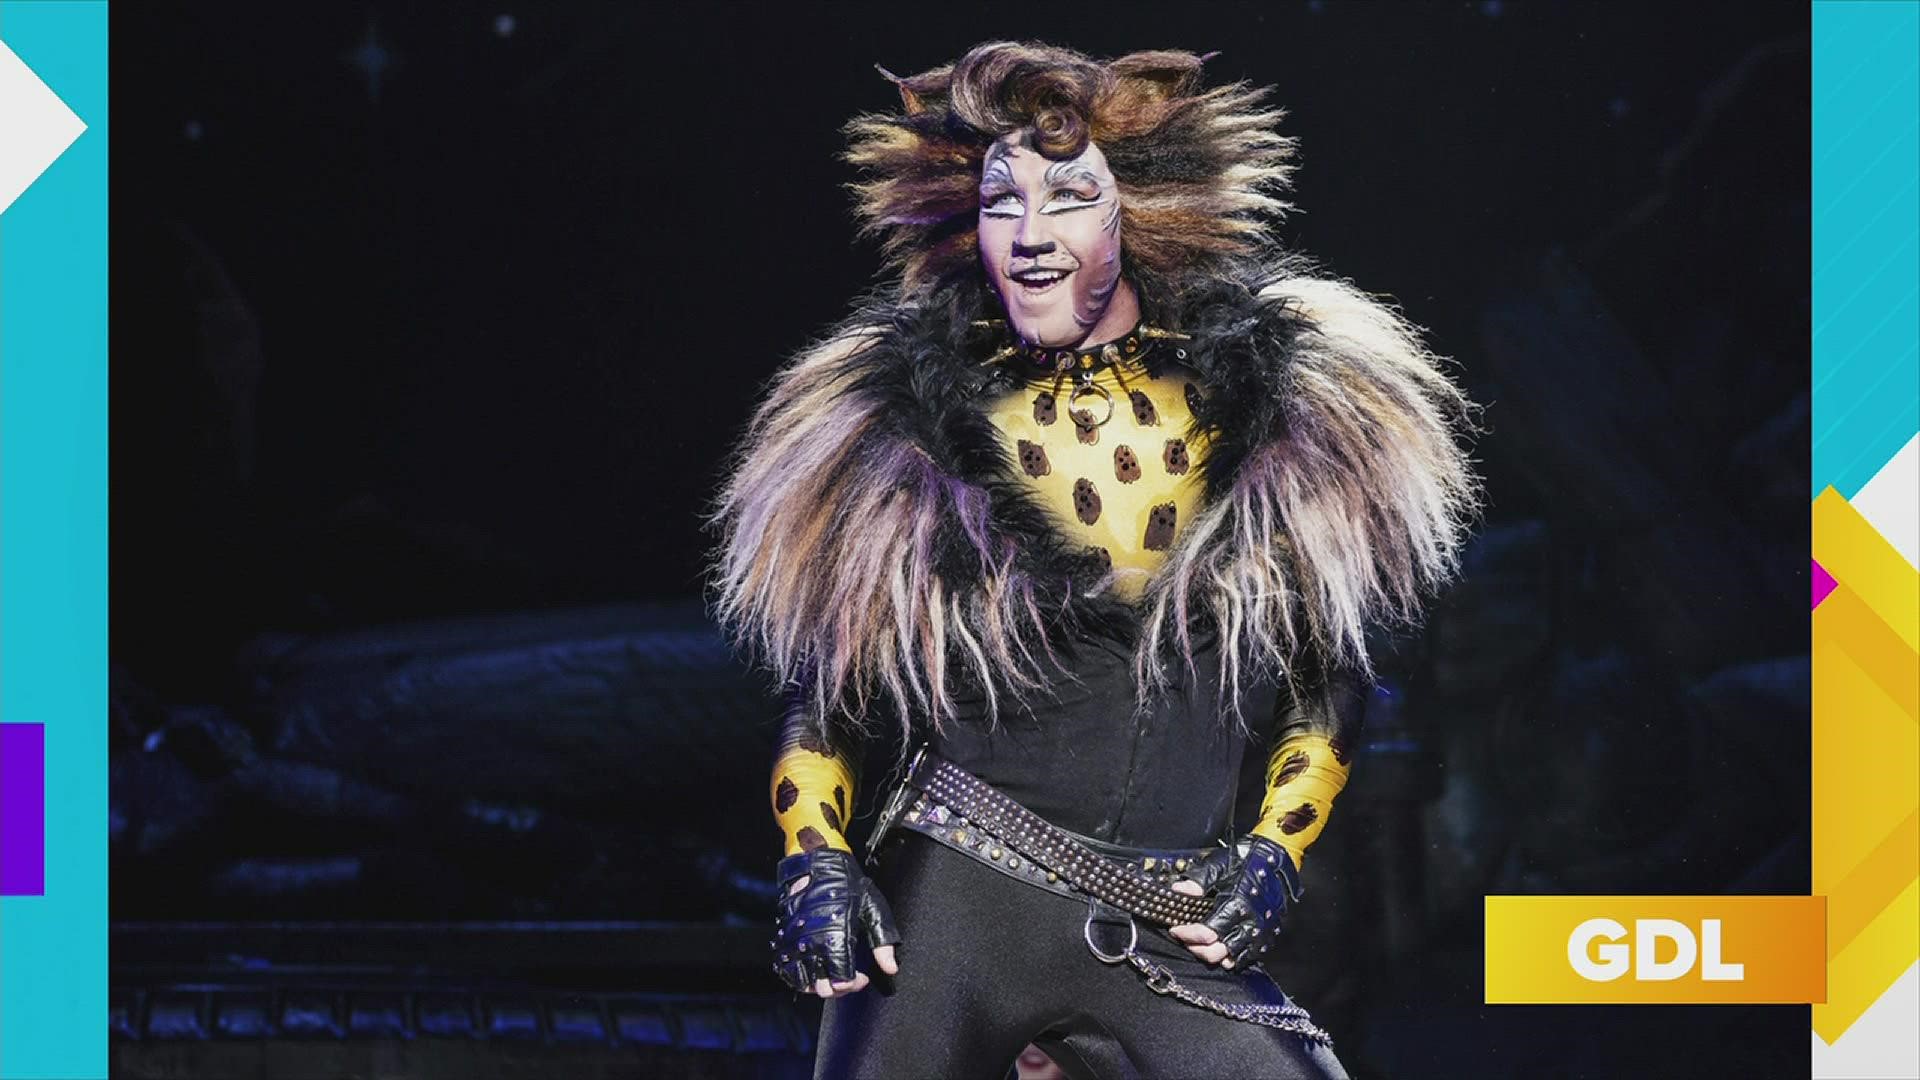 CATS runs January 18-23 at The Kentucky Center for the Performing Arts. Visit KentuckyPerformingArts.org for tickets.